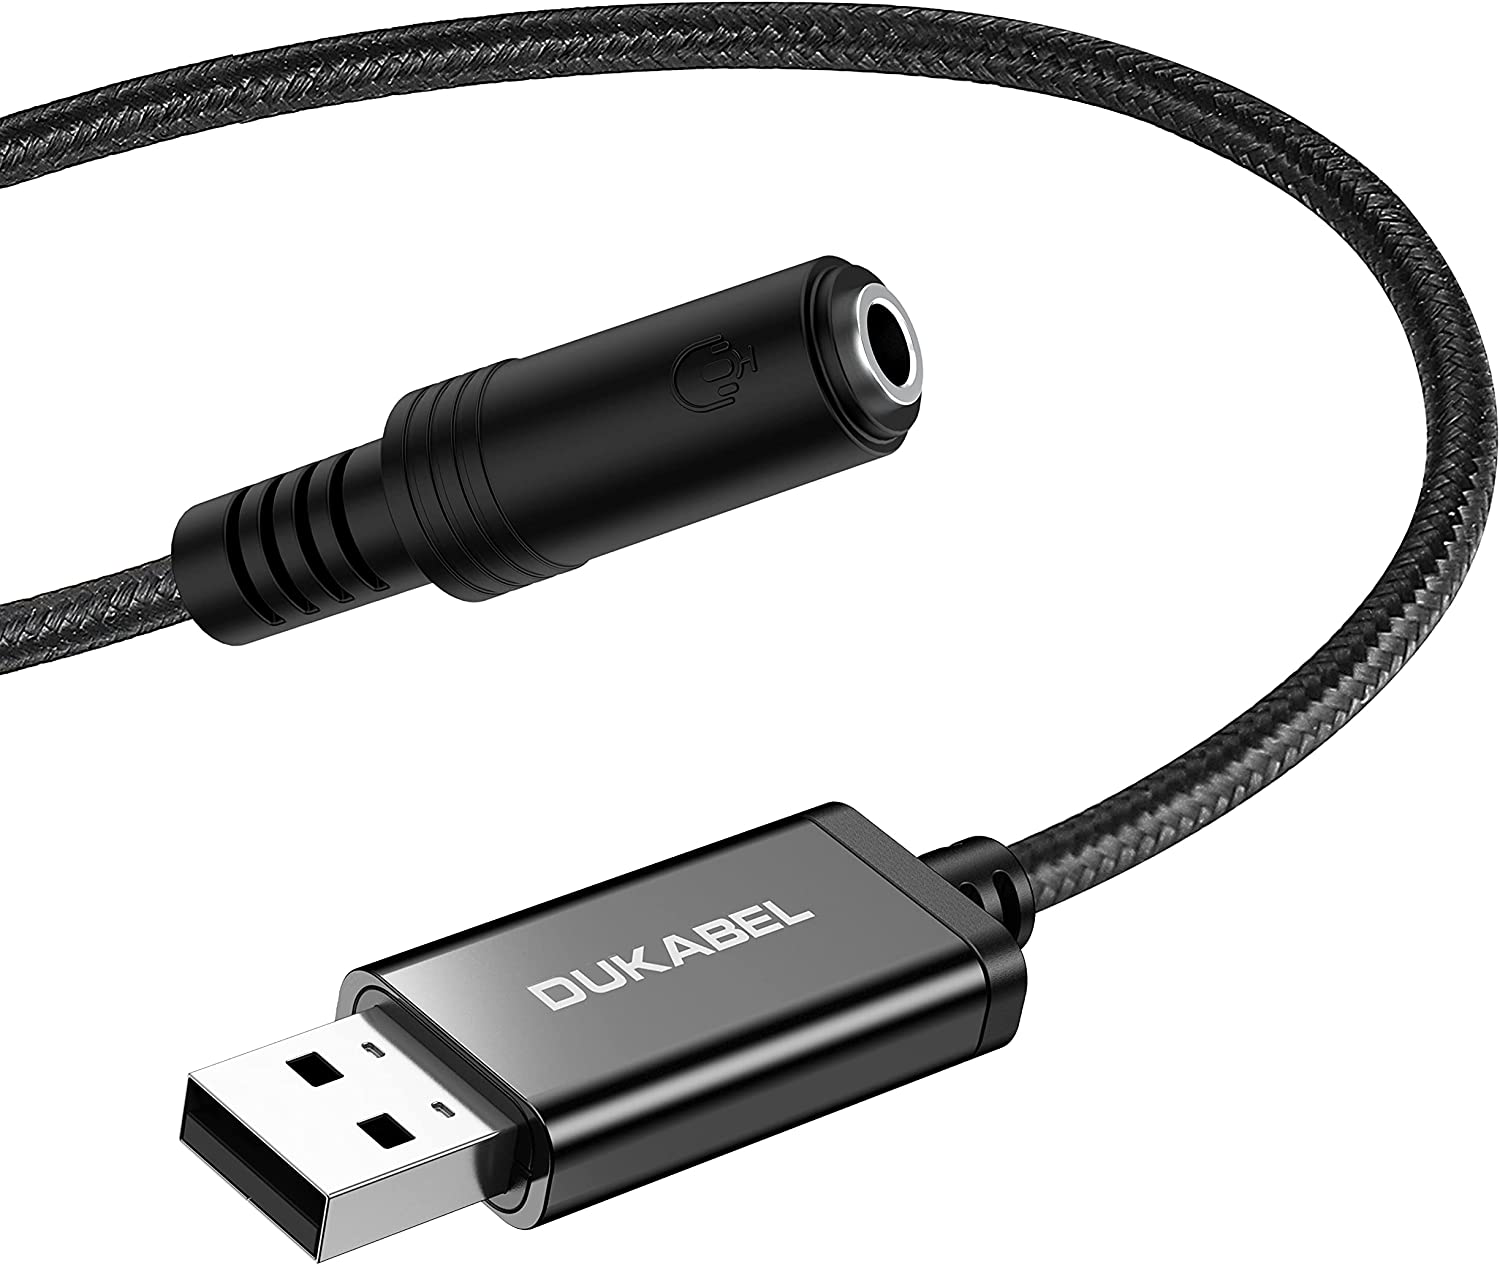 DUKABEL USB to 3.5mm Jack Audio Adapter, USB to Aux Cable with TRRS 4-Pole Mic-Supported USB to Headphone AUX Adapter Built-in Chip External Sound Card for PC PS4 PS5 and More [9.8 inch]